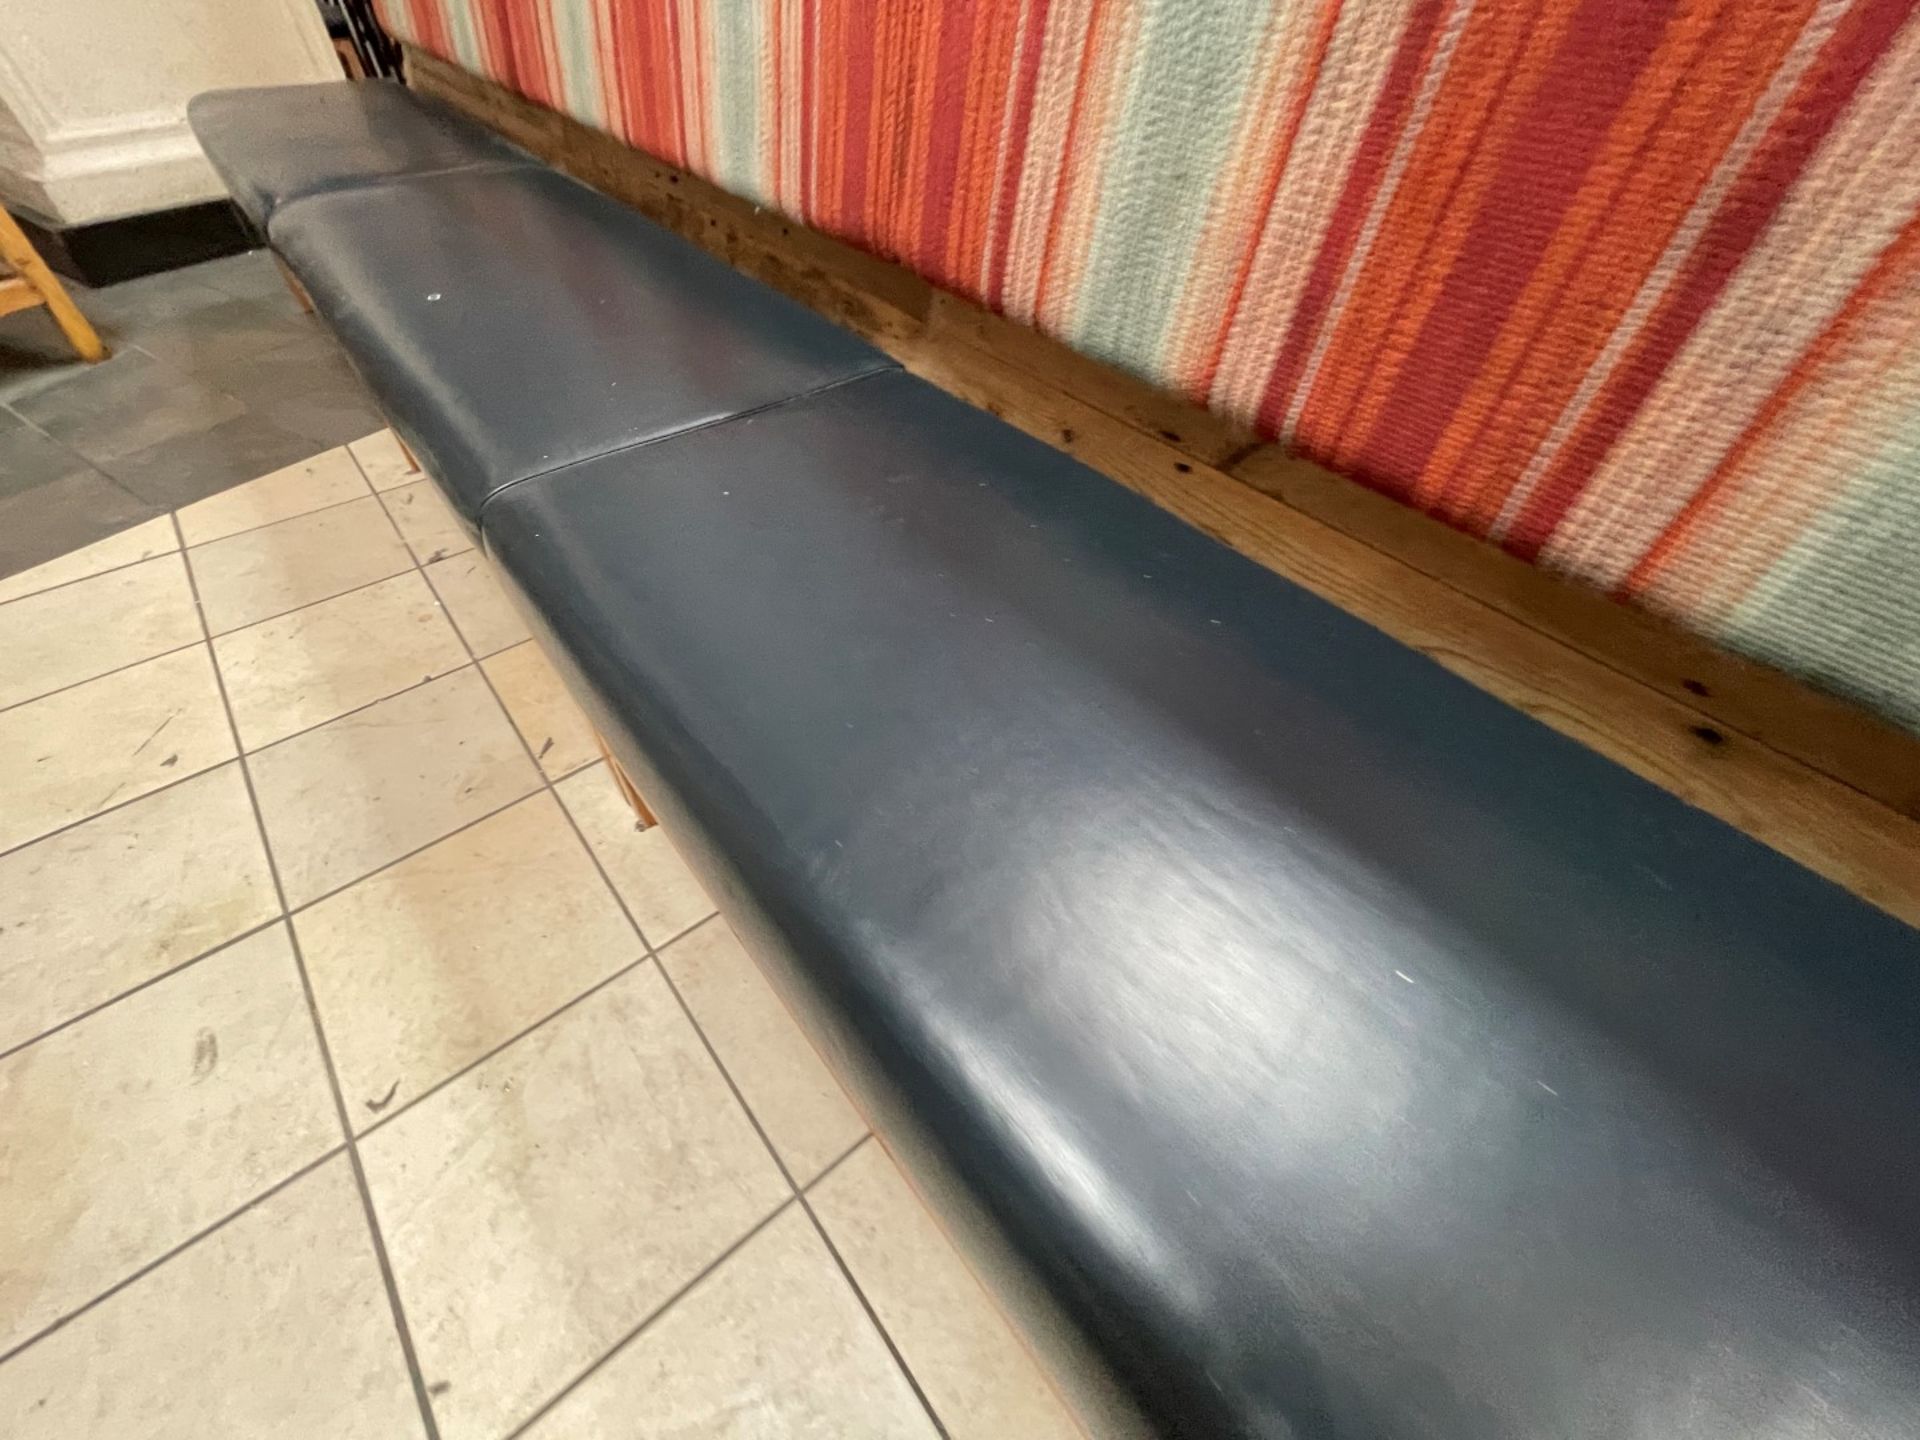 1 x Wooden Seating Bench Featuring Genuine Leather Seat Pads and Striped Fabric Back Rests - Image 3 of 10